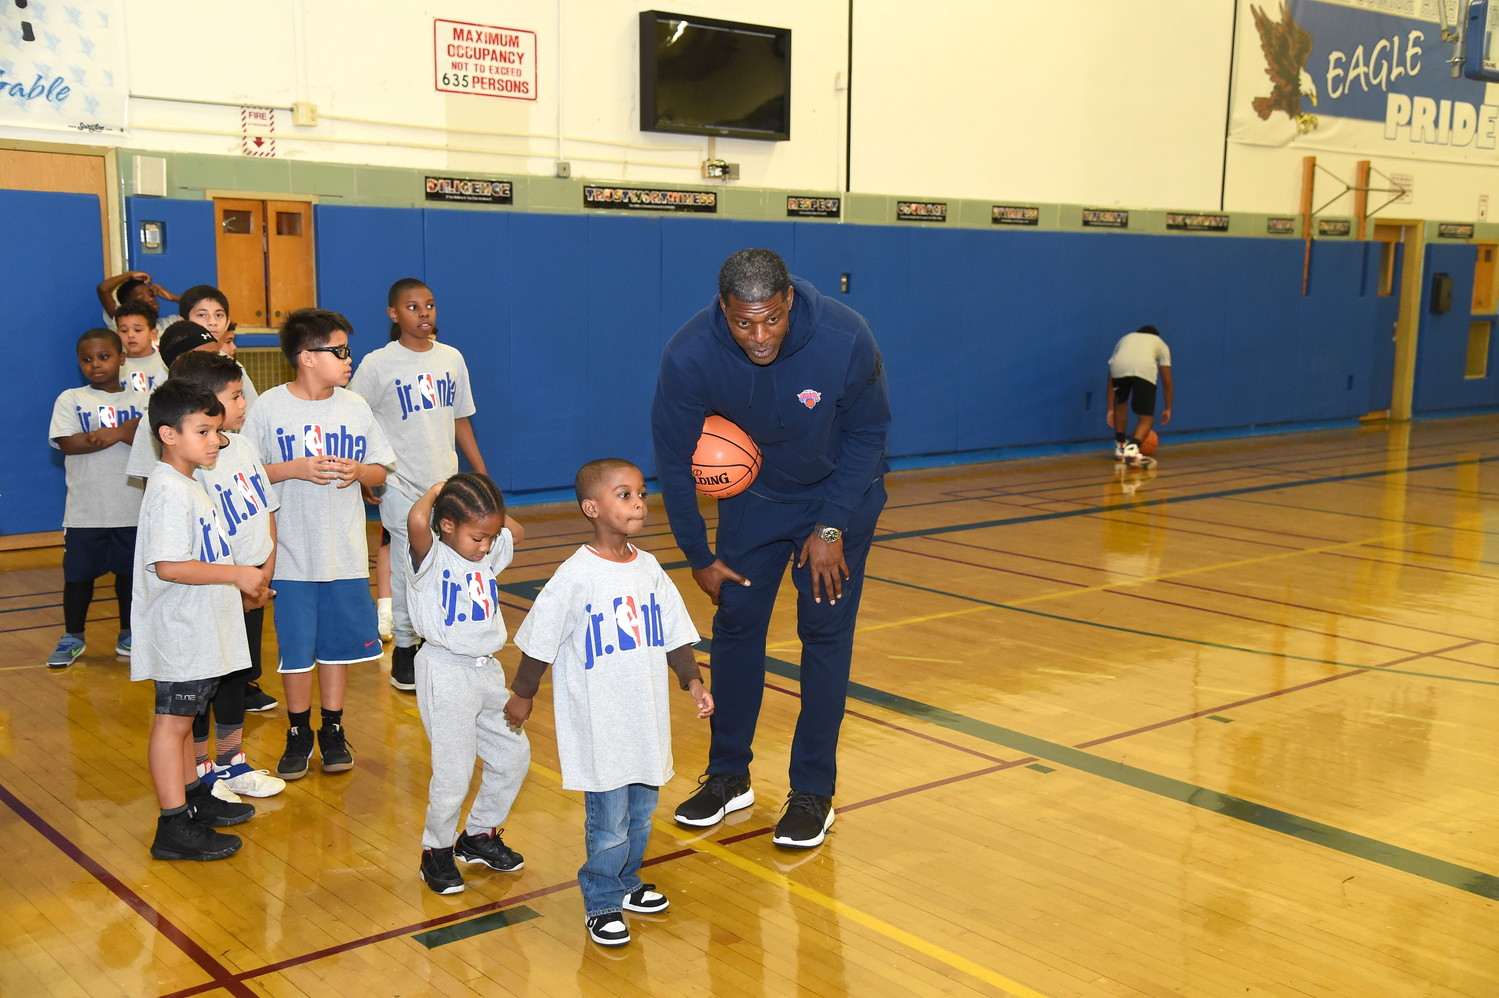 Former Knick Larry Johnson taught the more than 100 children who participated in the basketball clinic some layups.